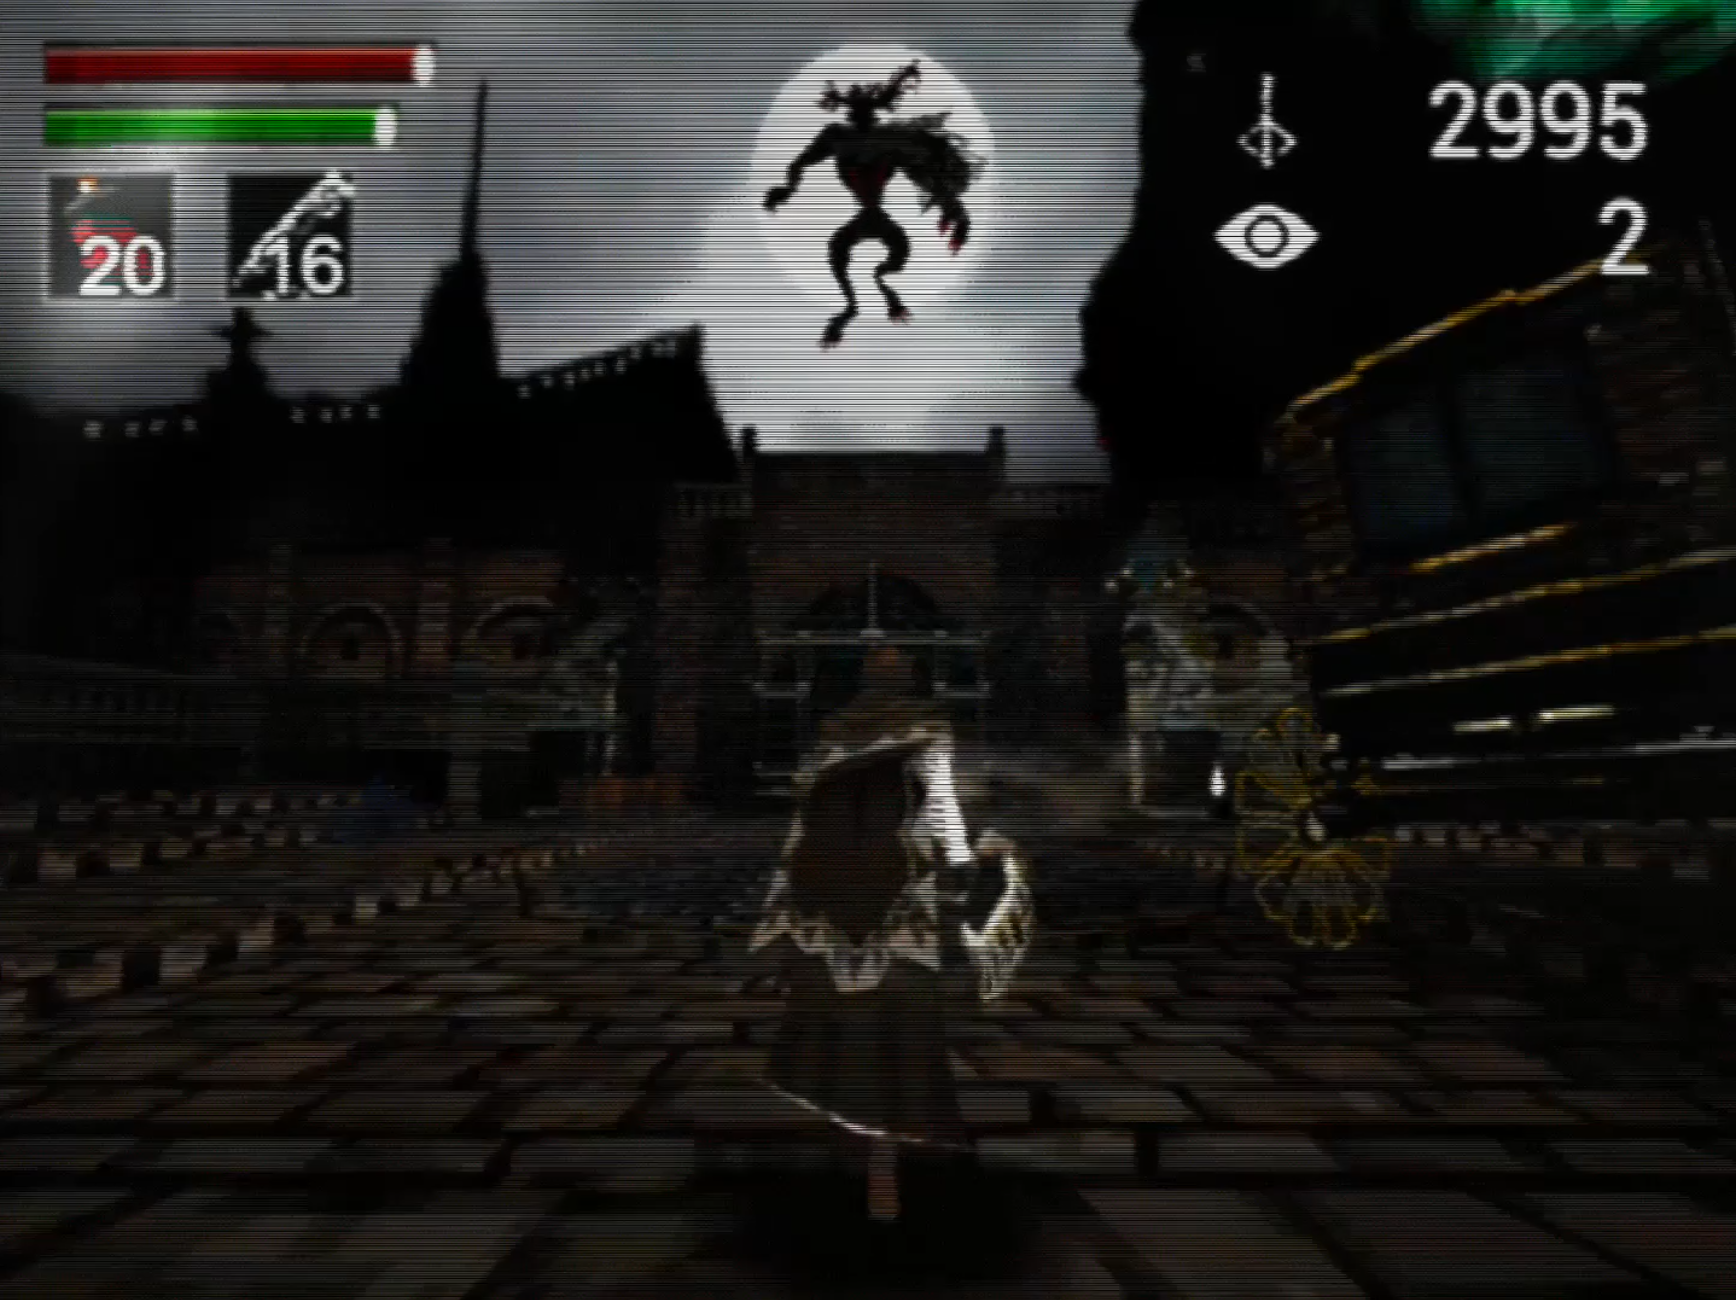 Bloodborne PSX is on PC even if its inspiration isn't